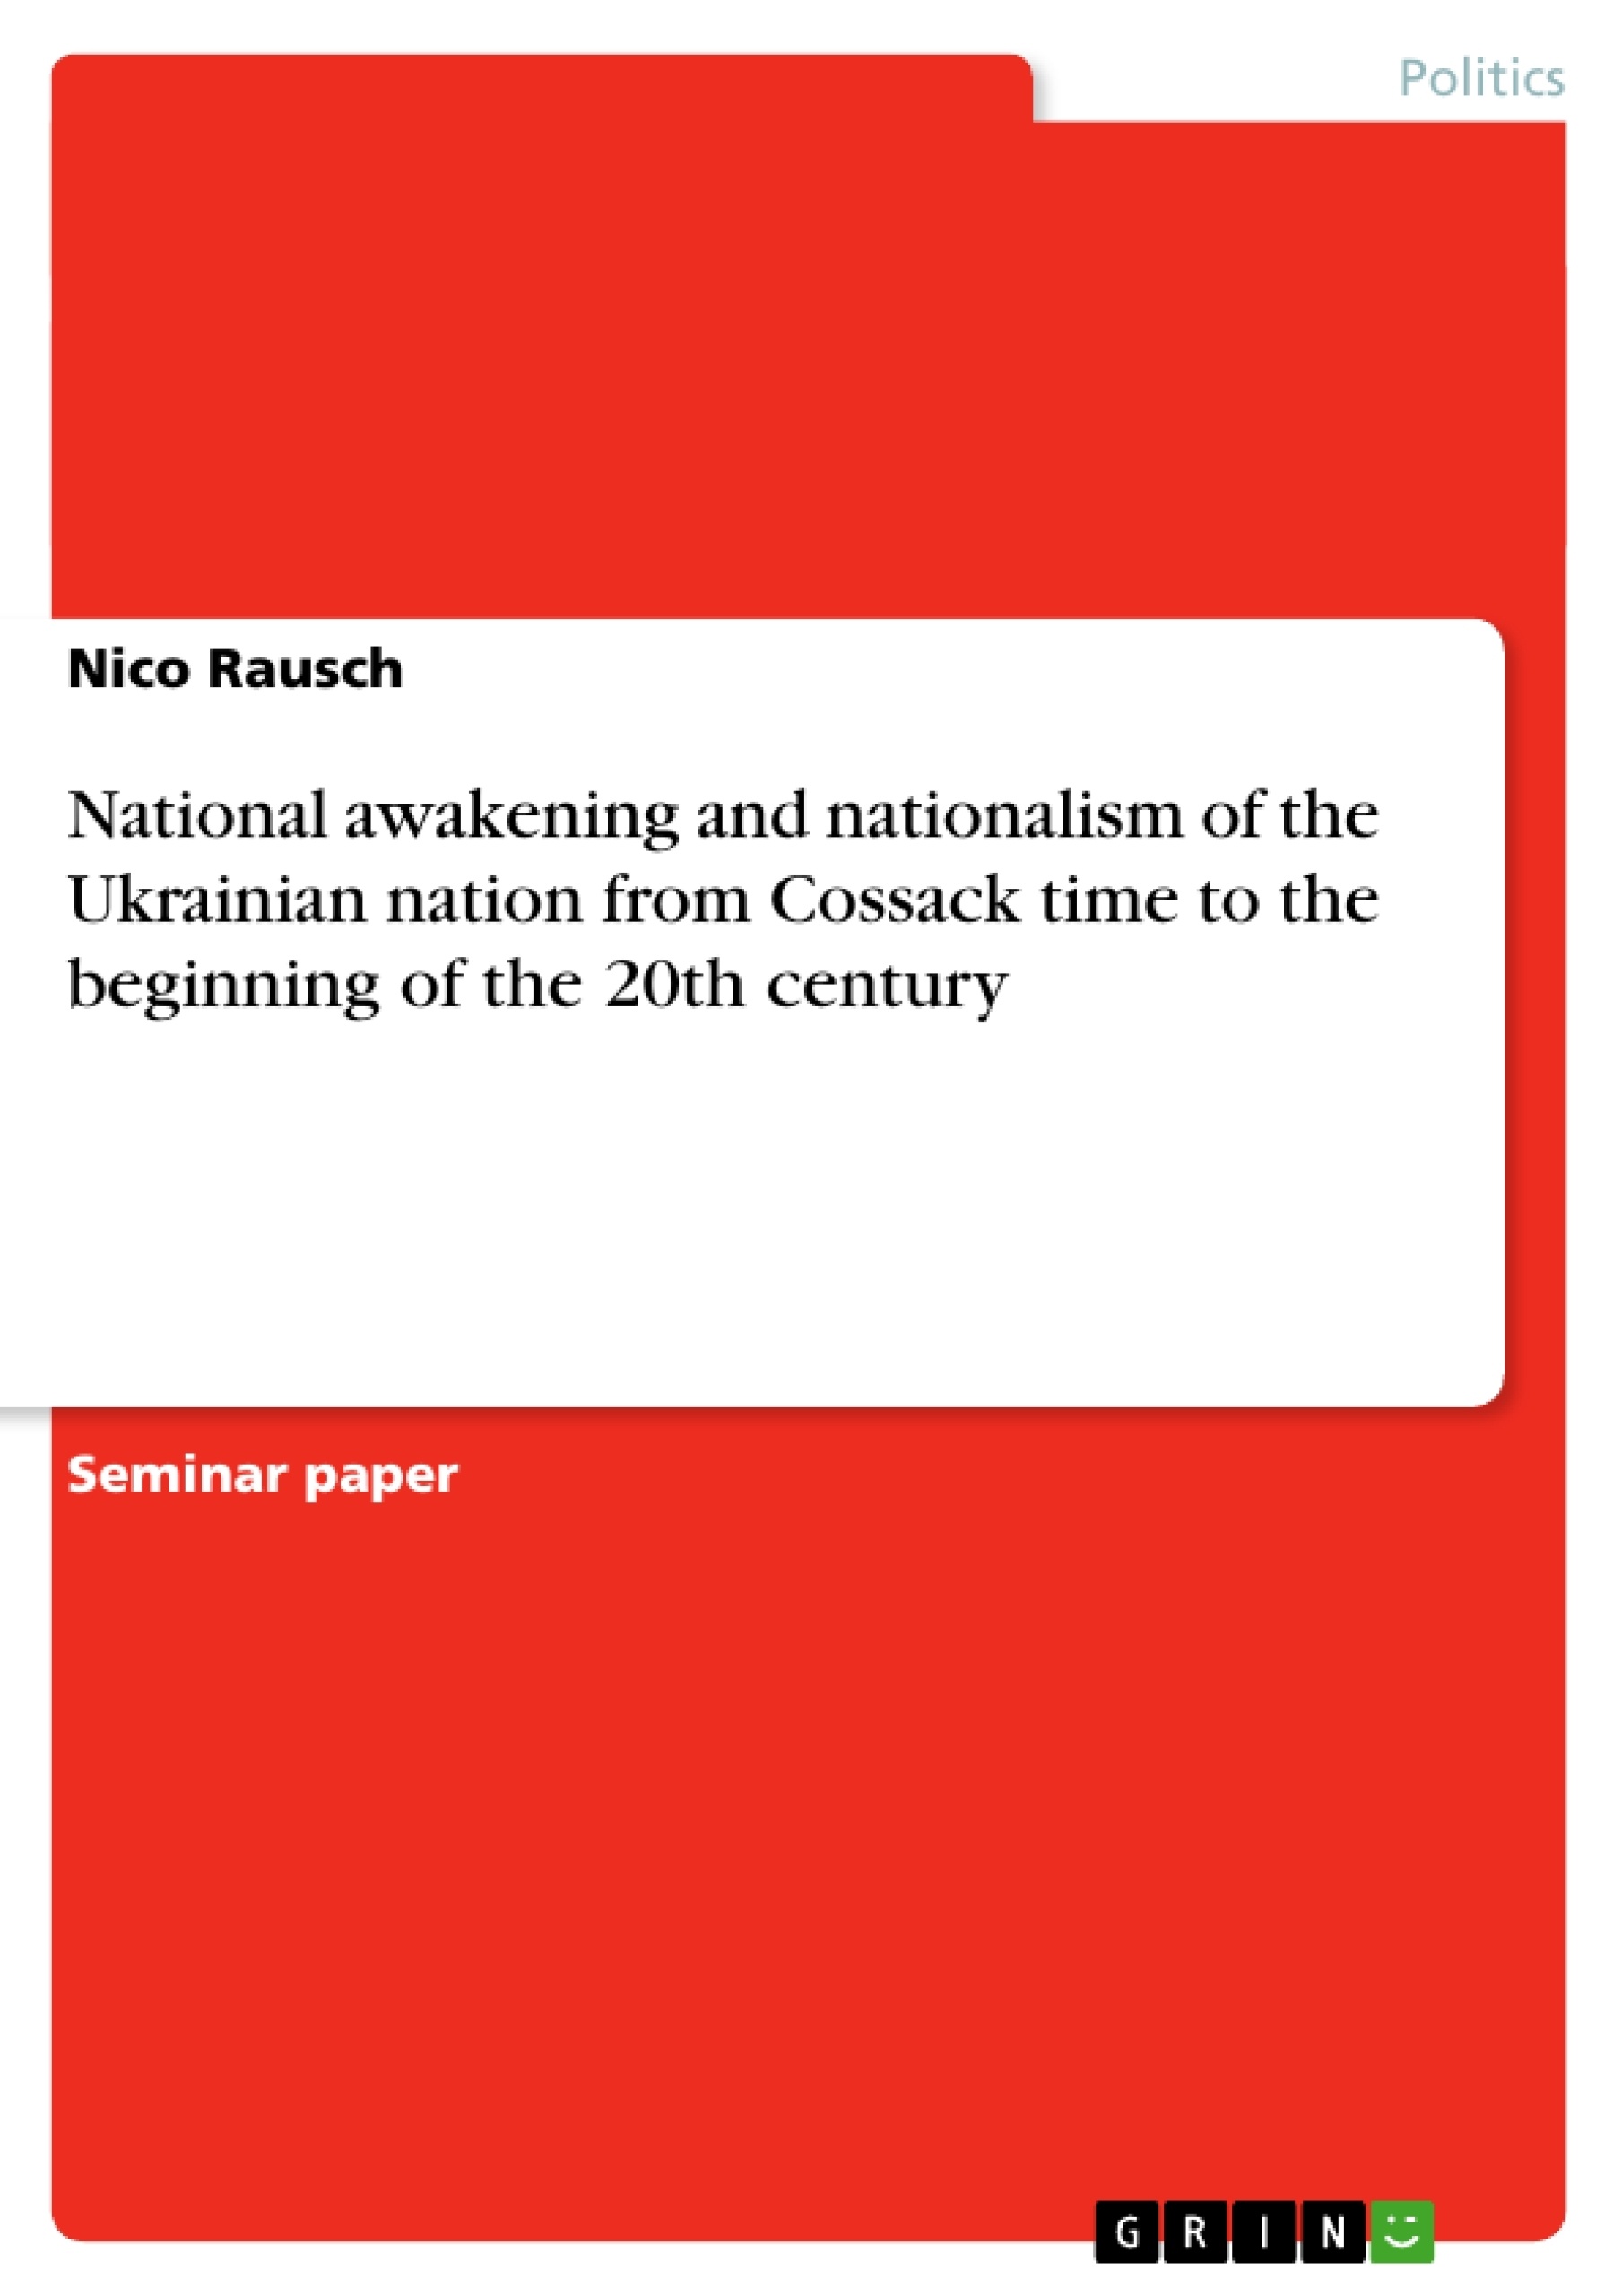 Titel: National awakening and nationalism of the Ukrainian nation from Cossack time to the beginning of the 20th century 